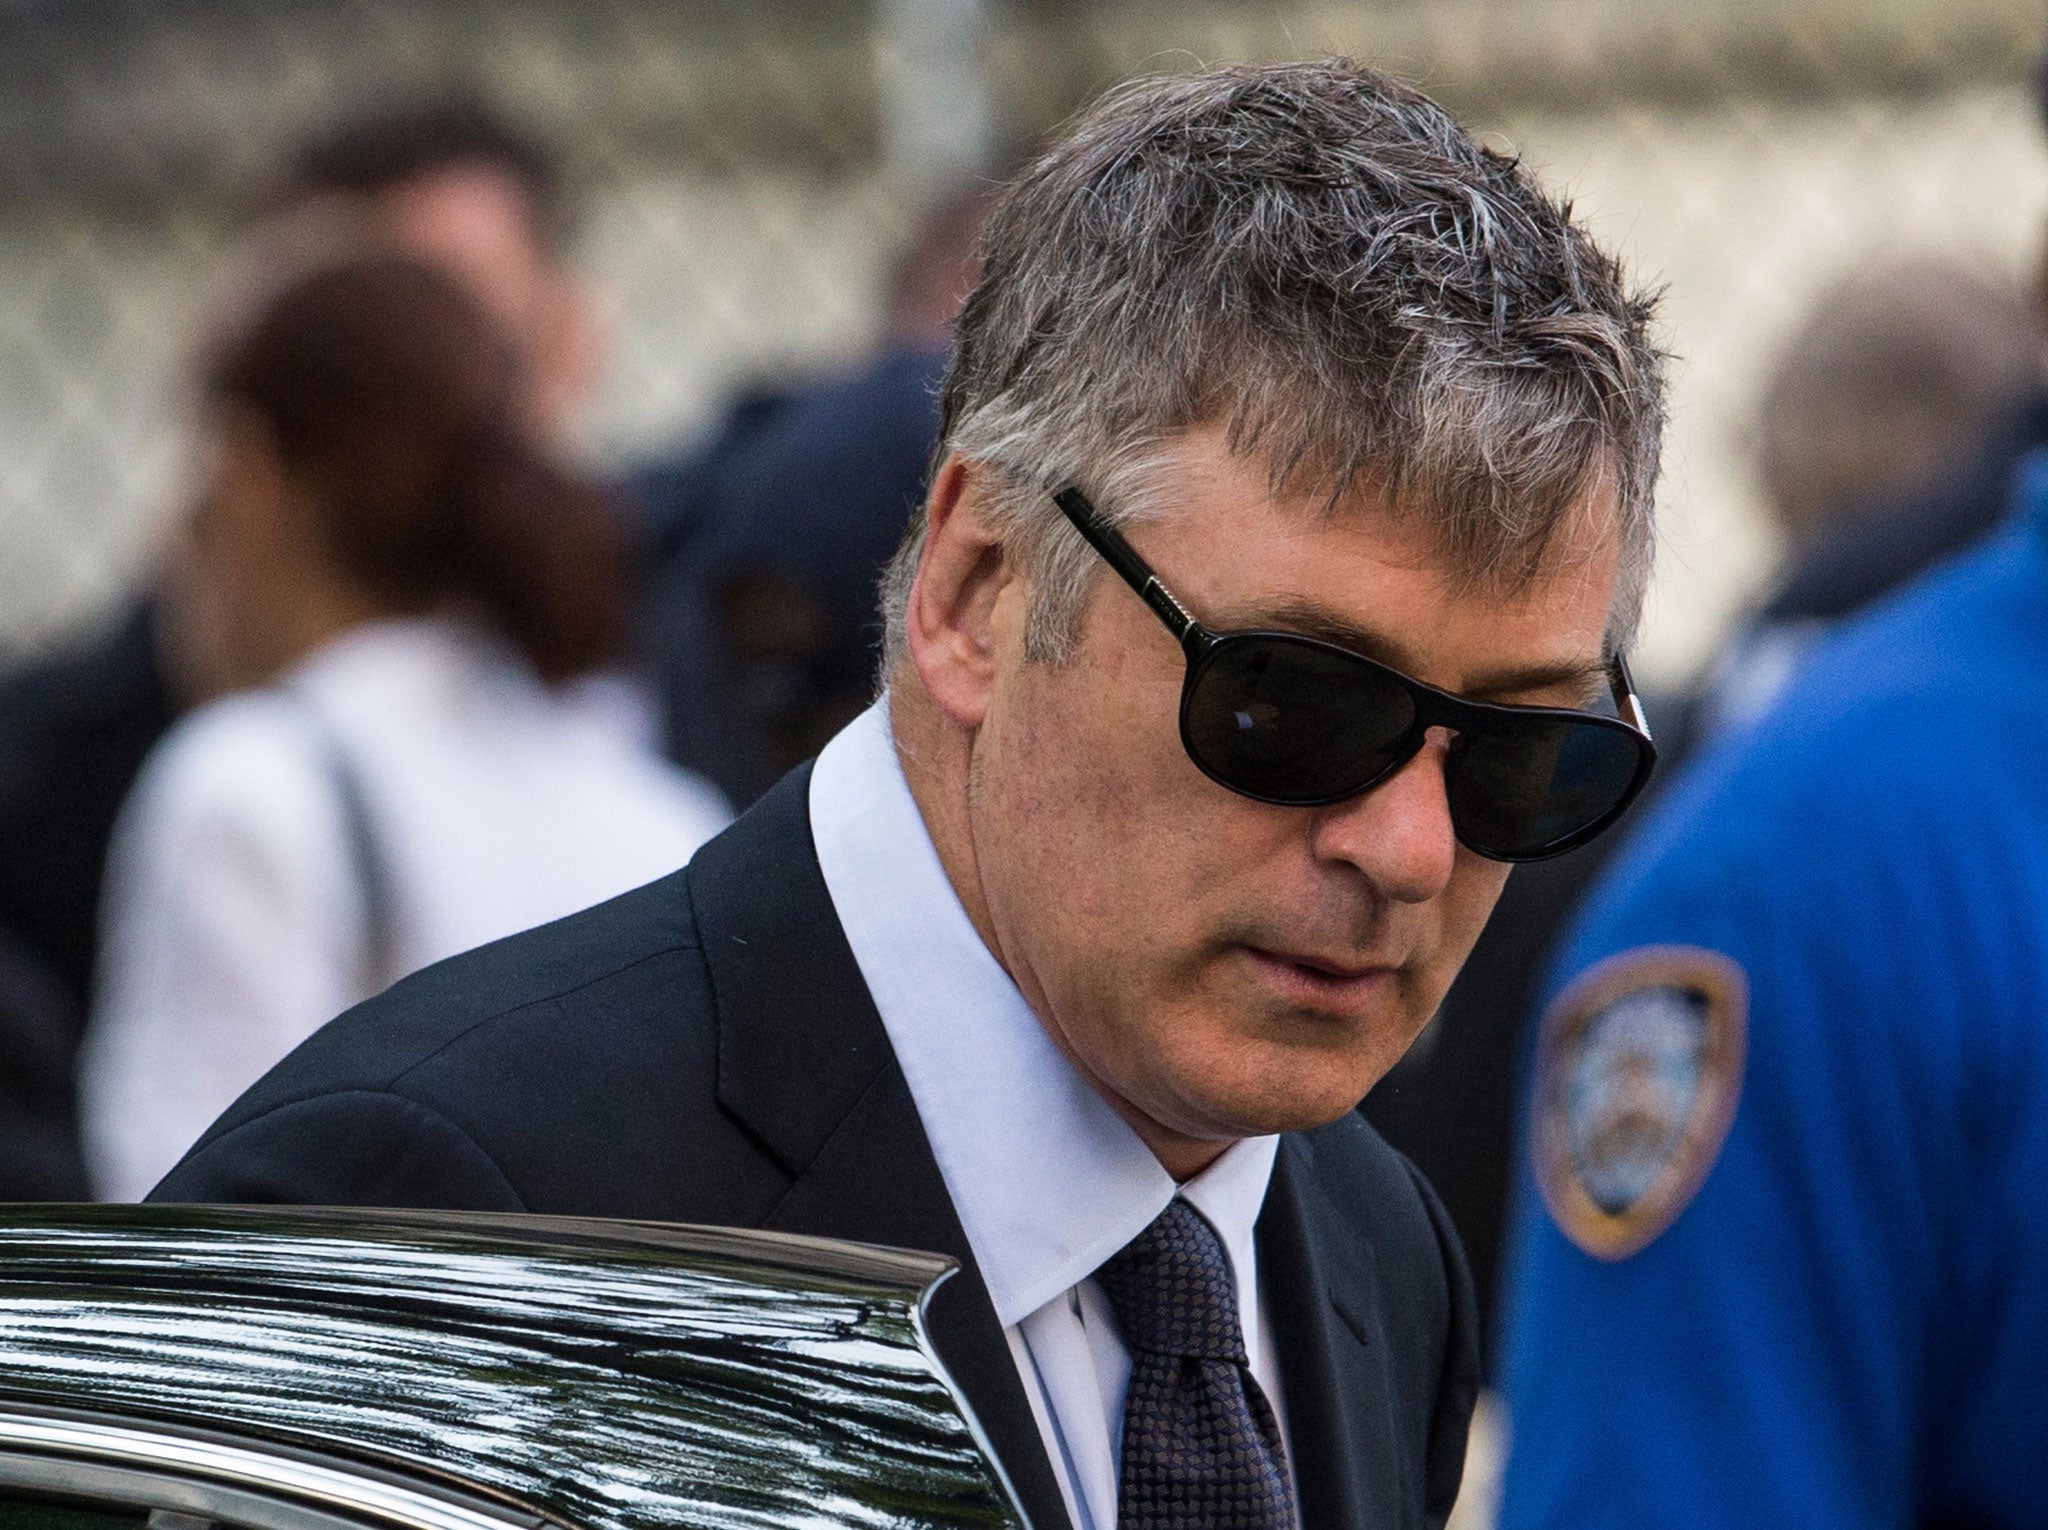 Actor Alec Baldwin arrives for actor James Gandolfini's funeral at The Cathedral Church of St. John the Divine on June 27, 2013 in New York City. Gandolfini passed away on June 19, 2013 while vacationing in Rome, Italy.